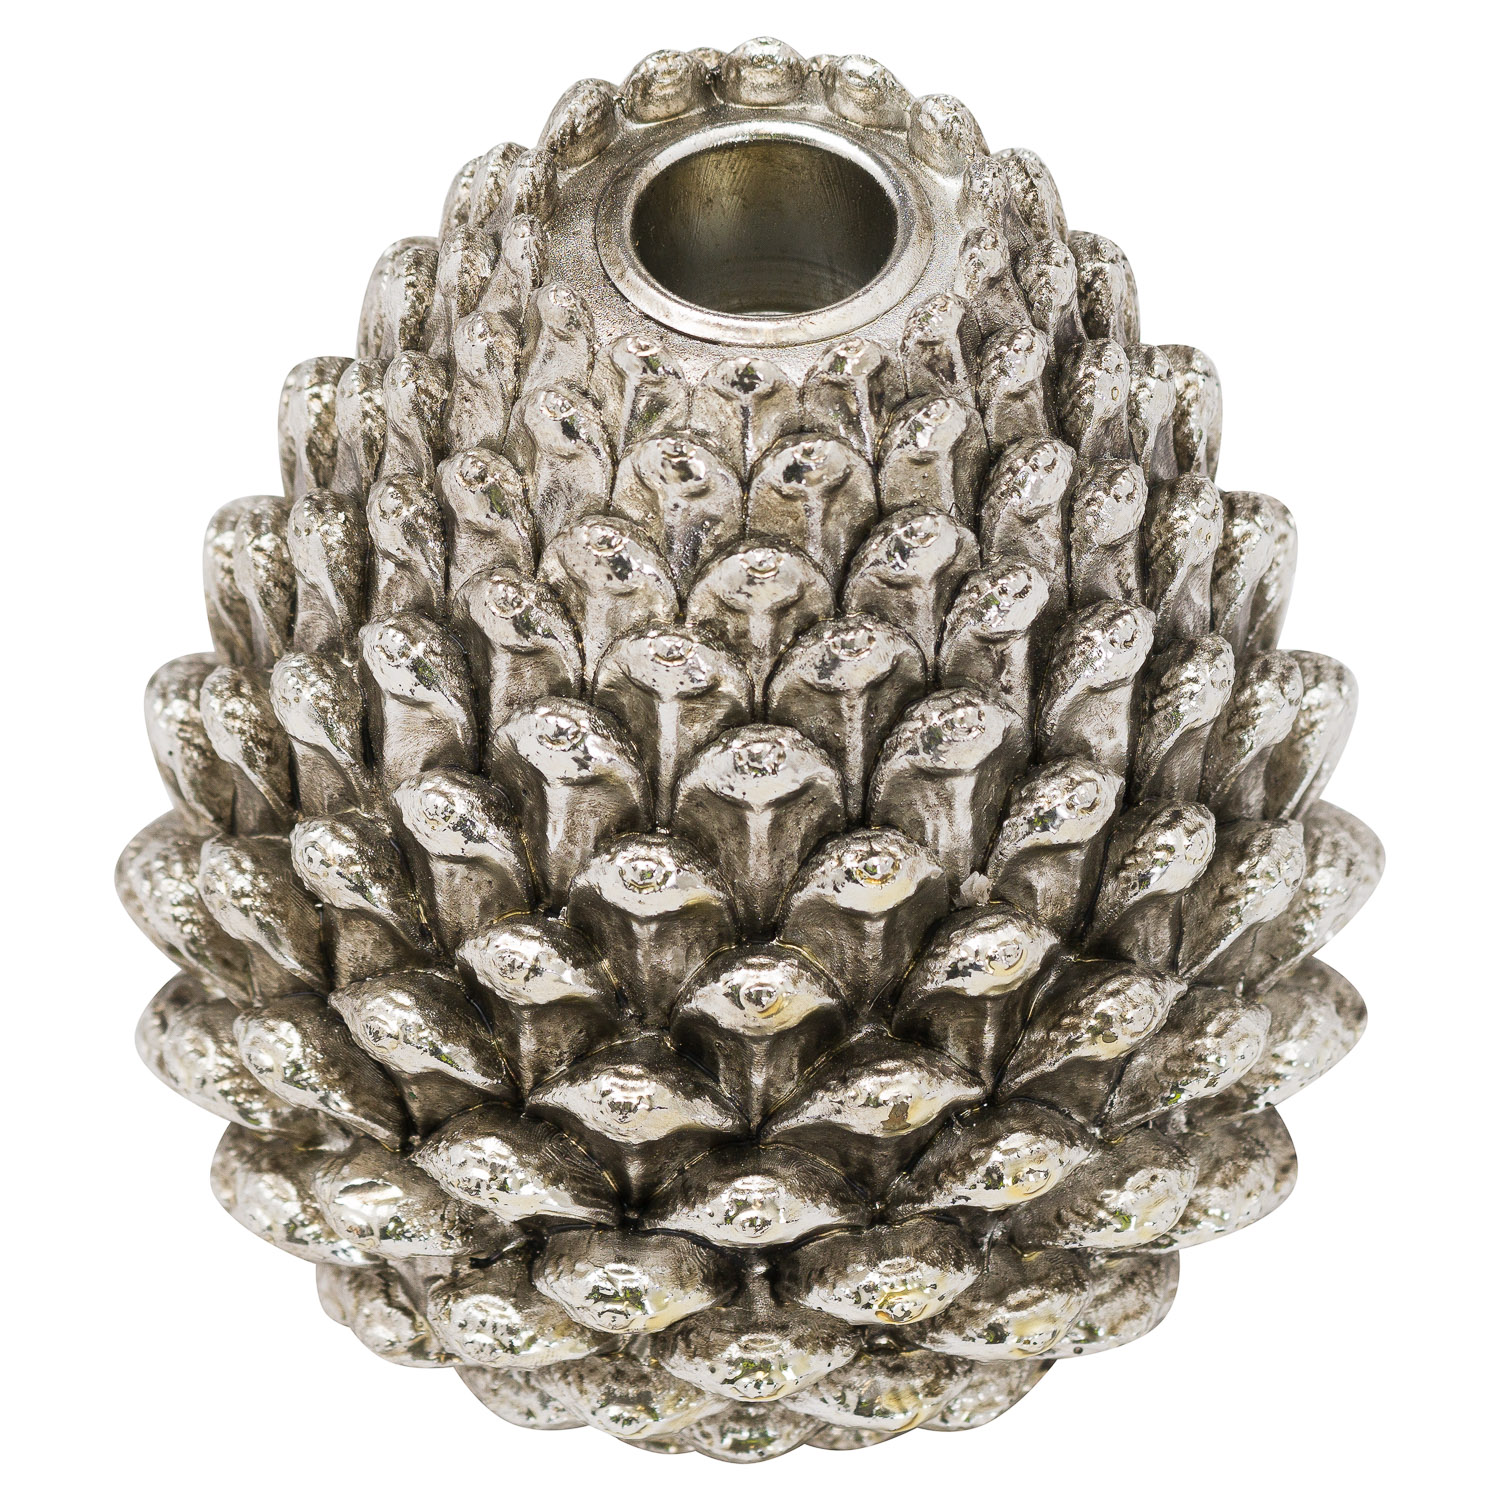 Large Silver Pinecone Candle Holder